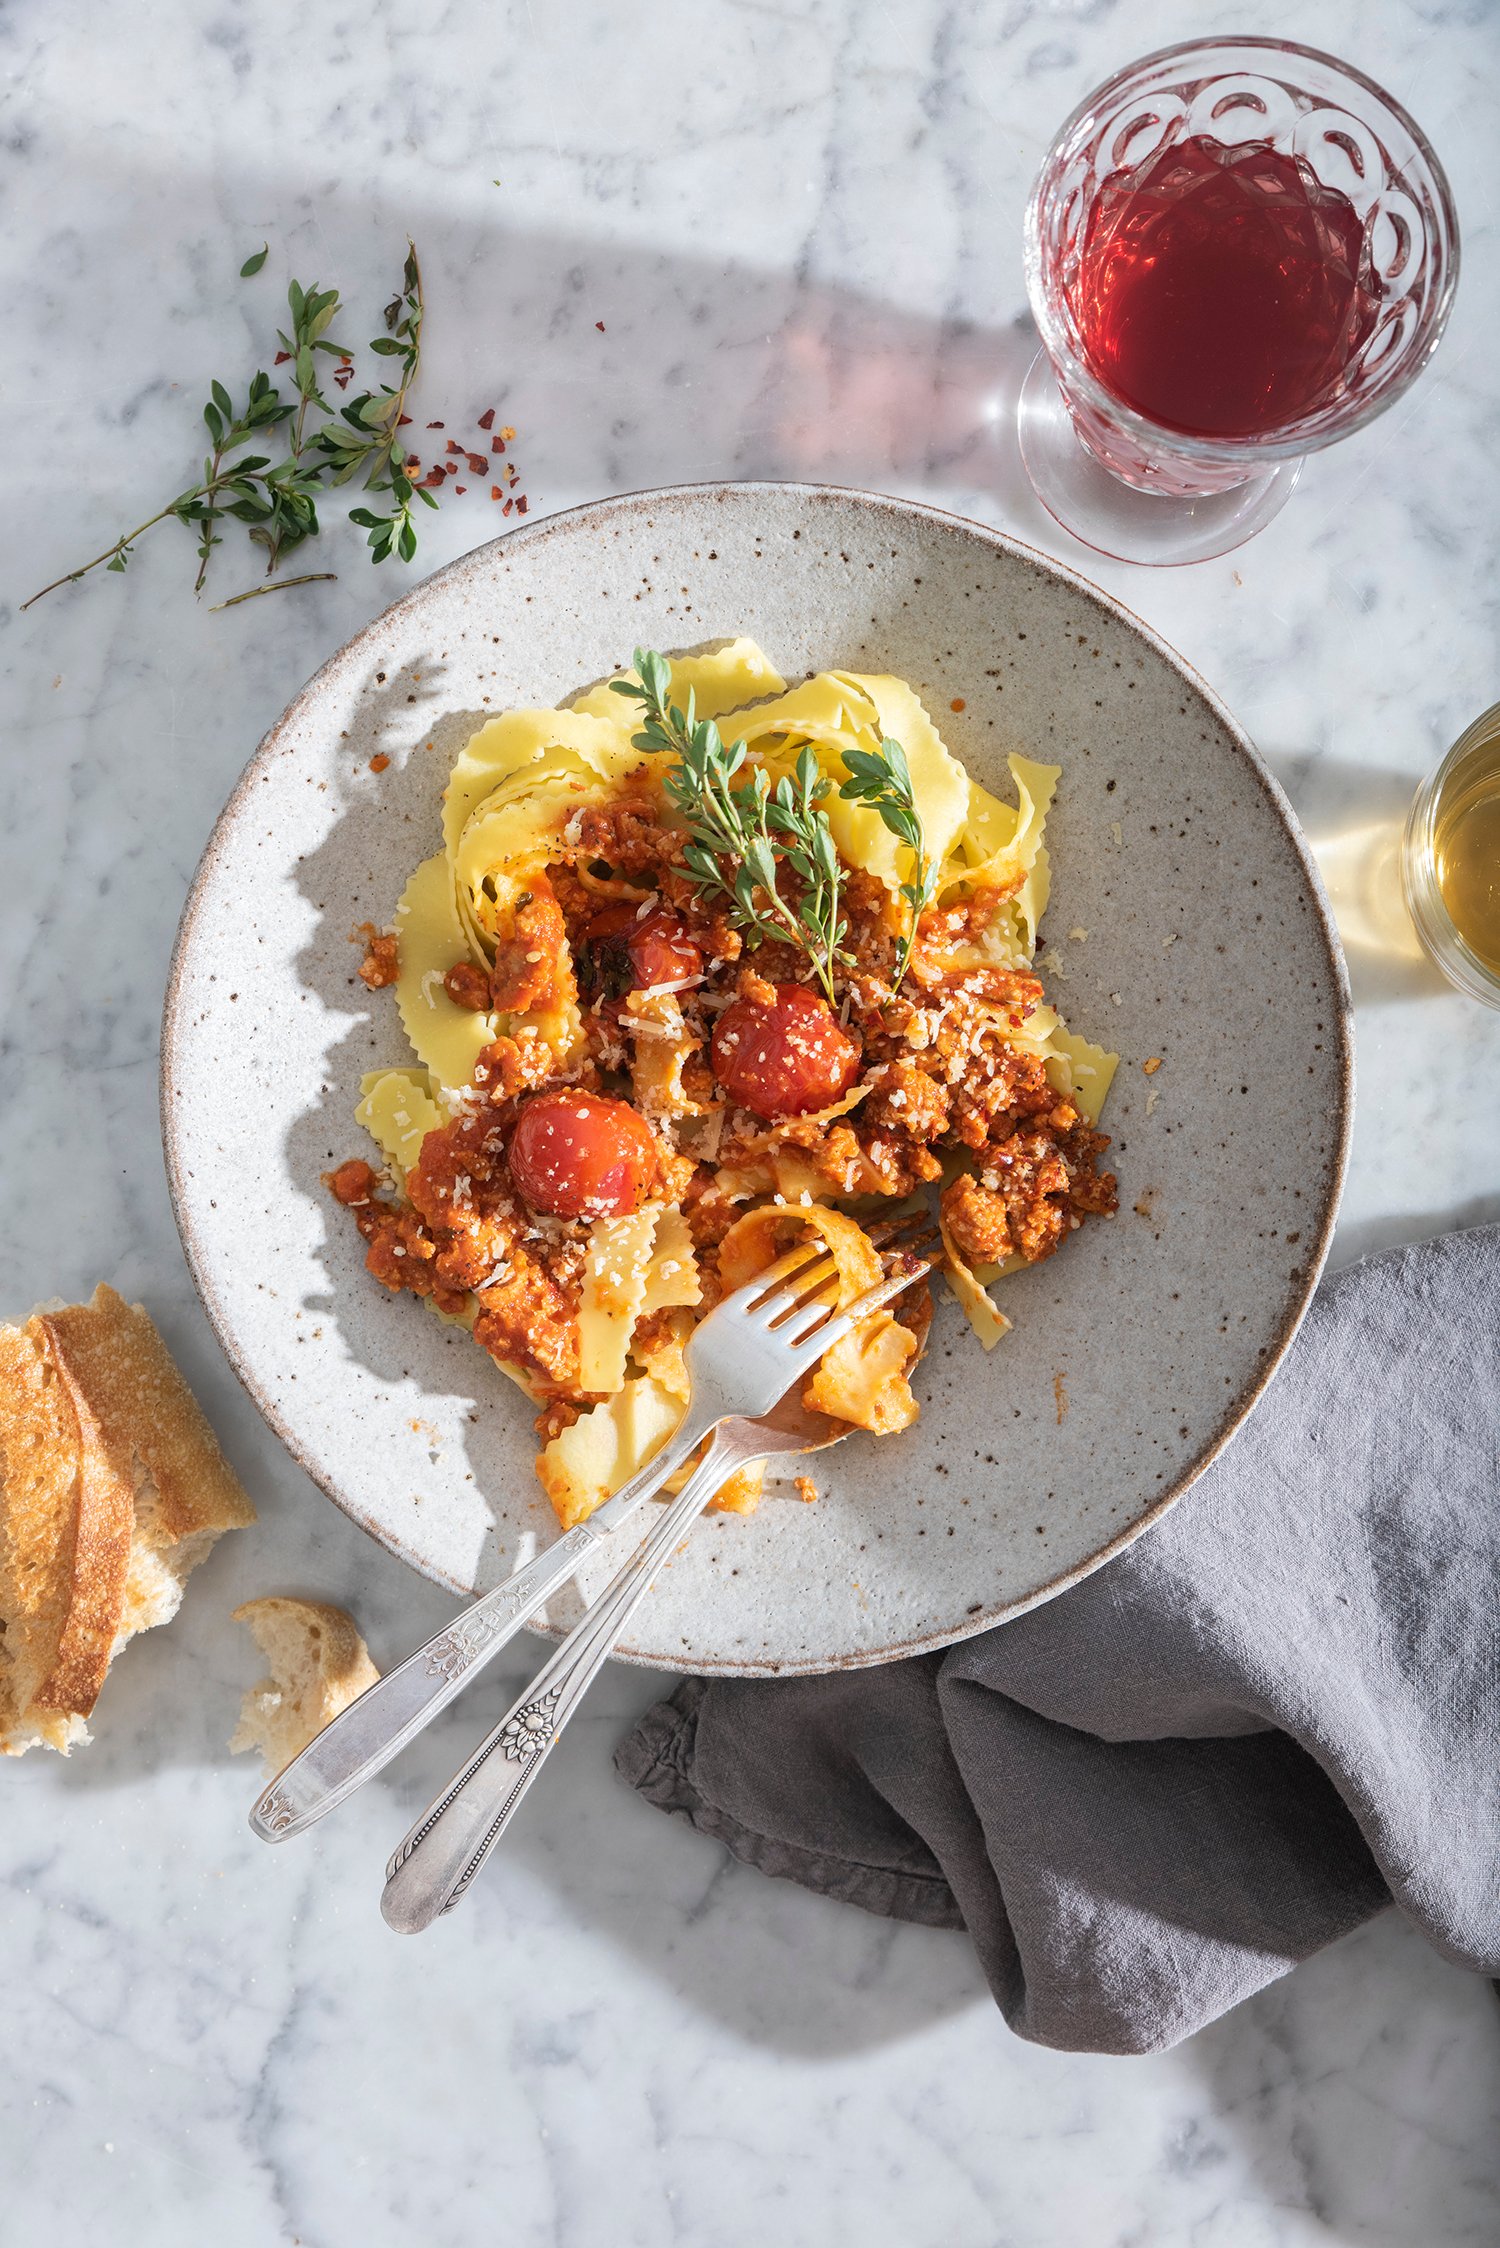 Pasta noodles with meat sauce and herb garnish plated on rustic large grey and earth-tone bowl with brown rim accompanied by a glass of white wine and torn piece of baguette 